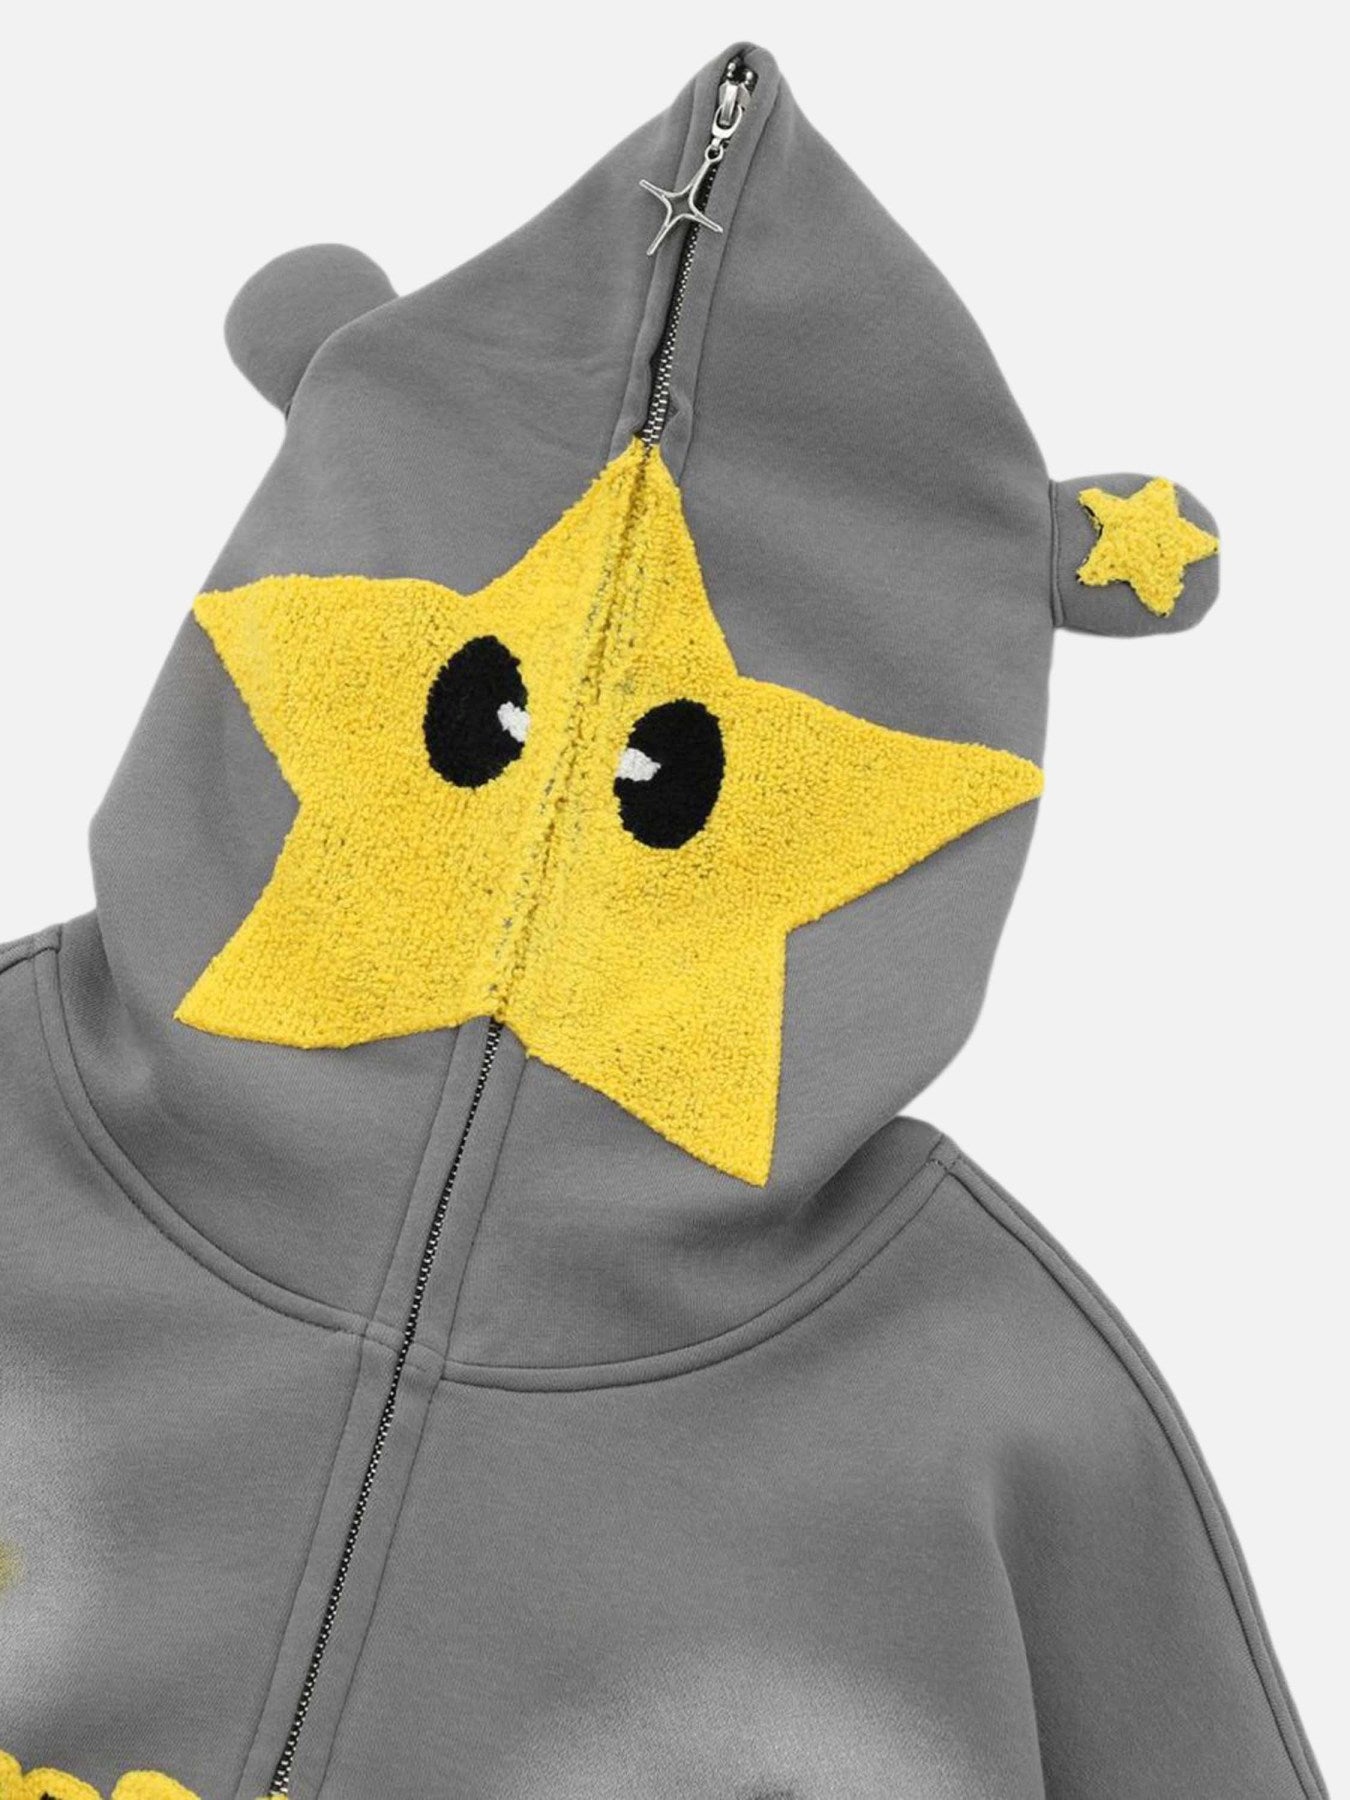 Thesupermade Star Embroidered Hooded Sweatshirt - 1843